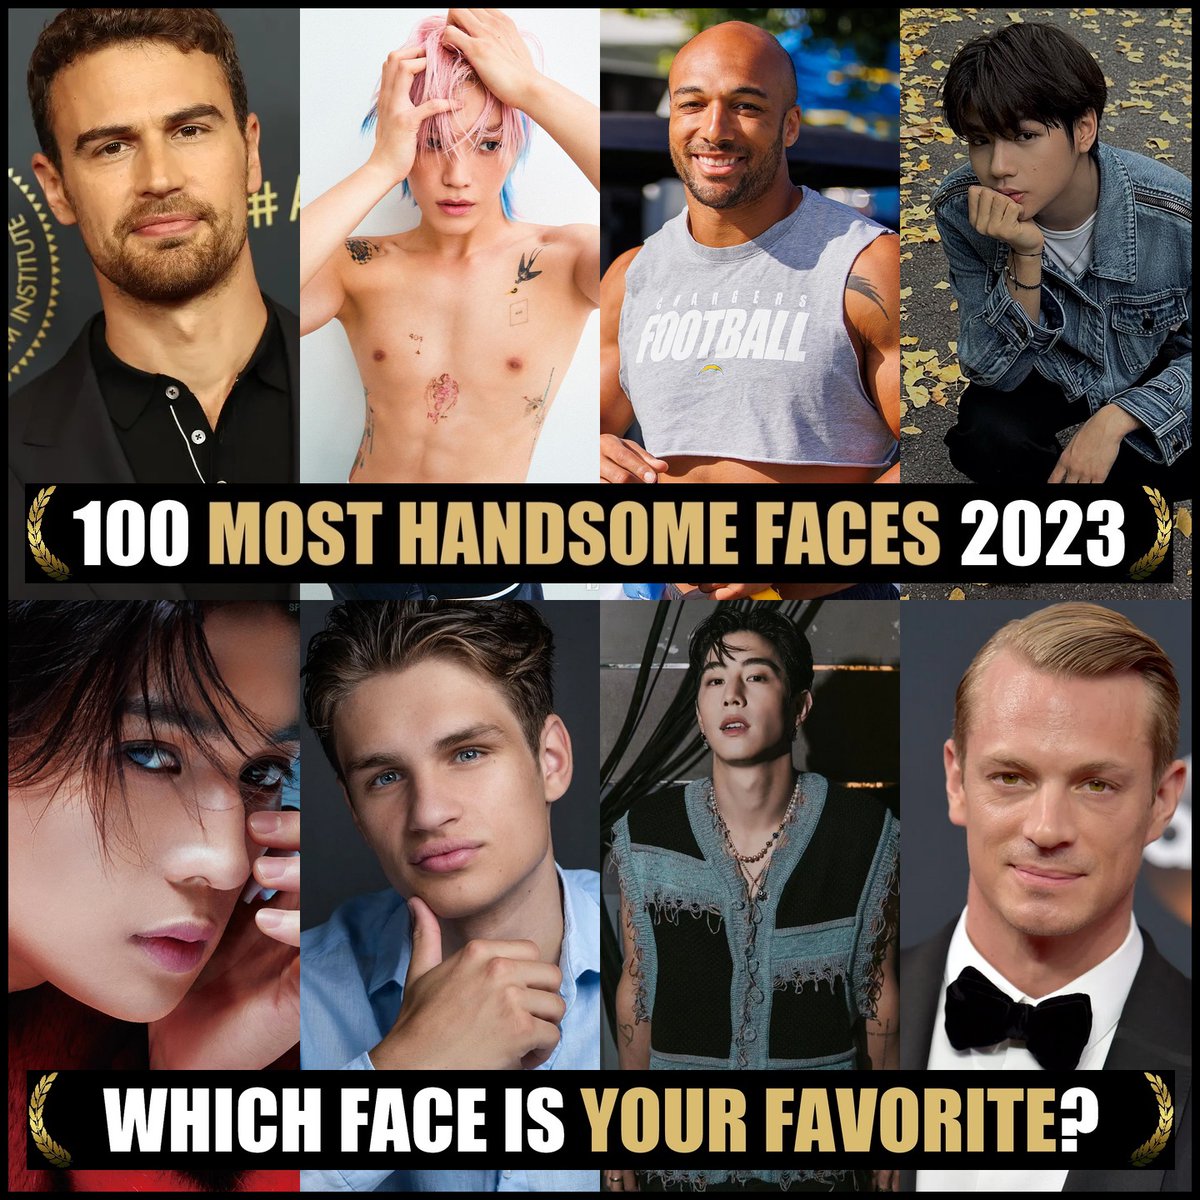 Nominations: 100 Most Handsome Faces 2023. Congrats! Would you like to nominate & vote? Please join our Patreon (Link in Bio) #TCCandler #100faces2023 #TheoJames #TAEYONG #nct #nct127 #nctu #SuperM #hori7on #yuseiyagi #FANTASTICS #marktuan #got7 #JOELKINNAMAN